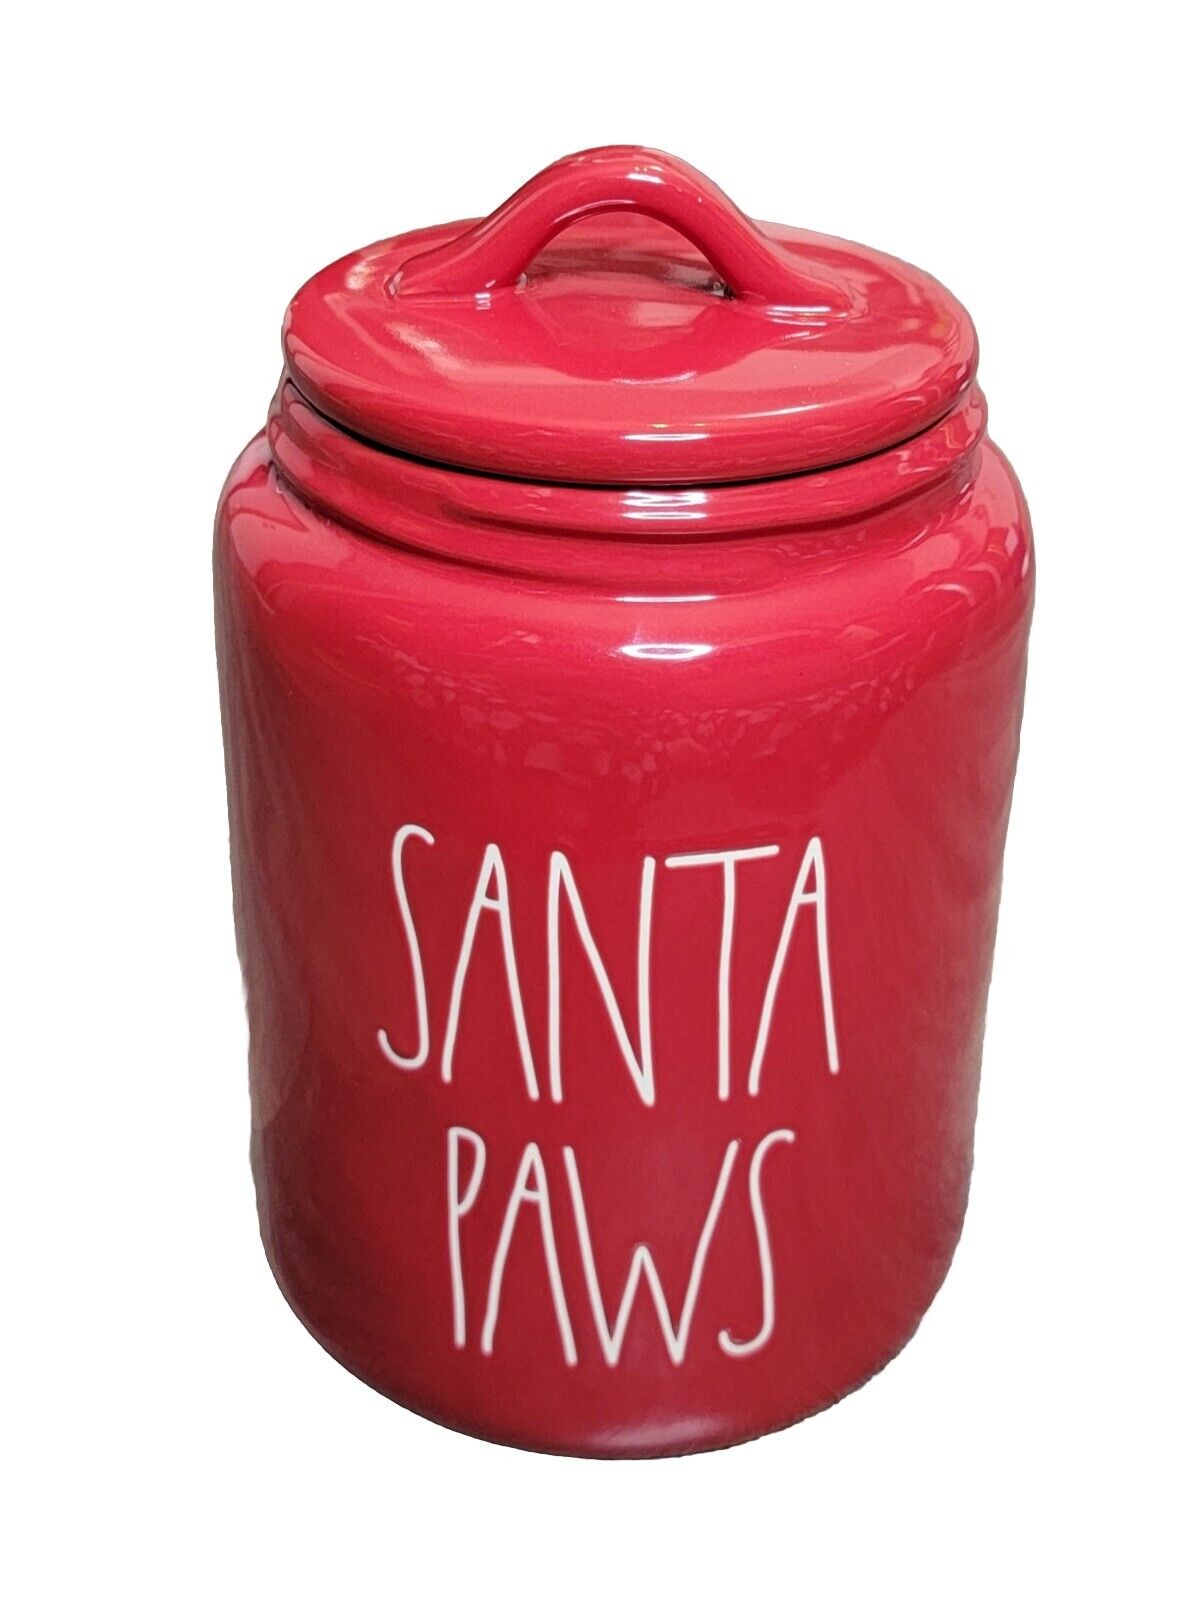 Rae Dunn Santa Paws Large Ceramic Canister Artisan Collection By Magenta